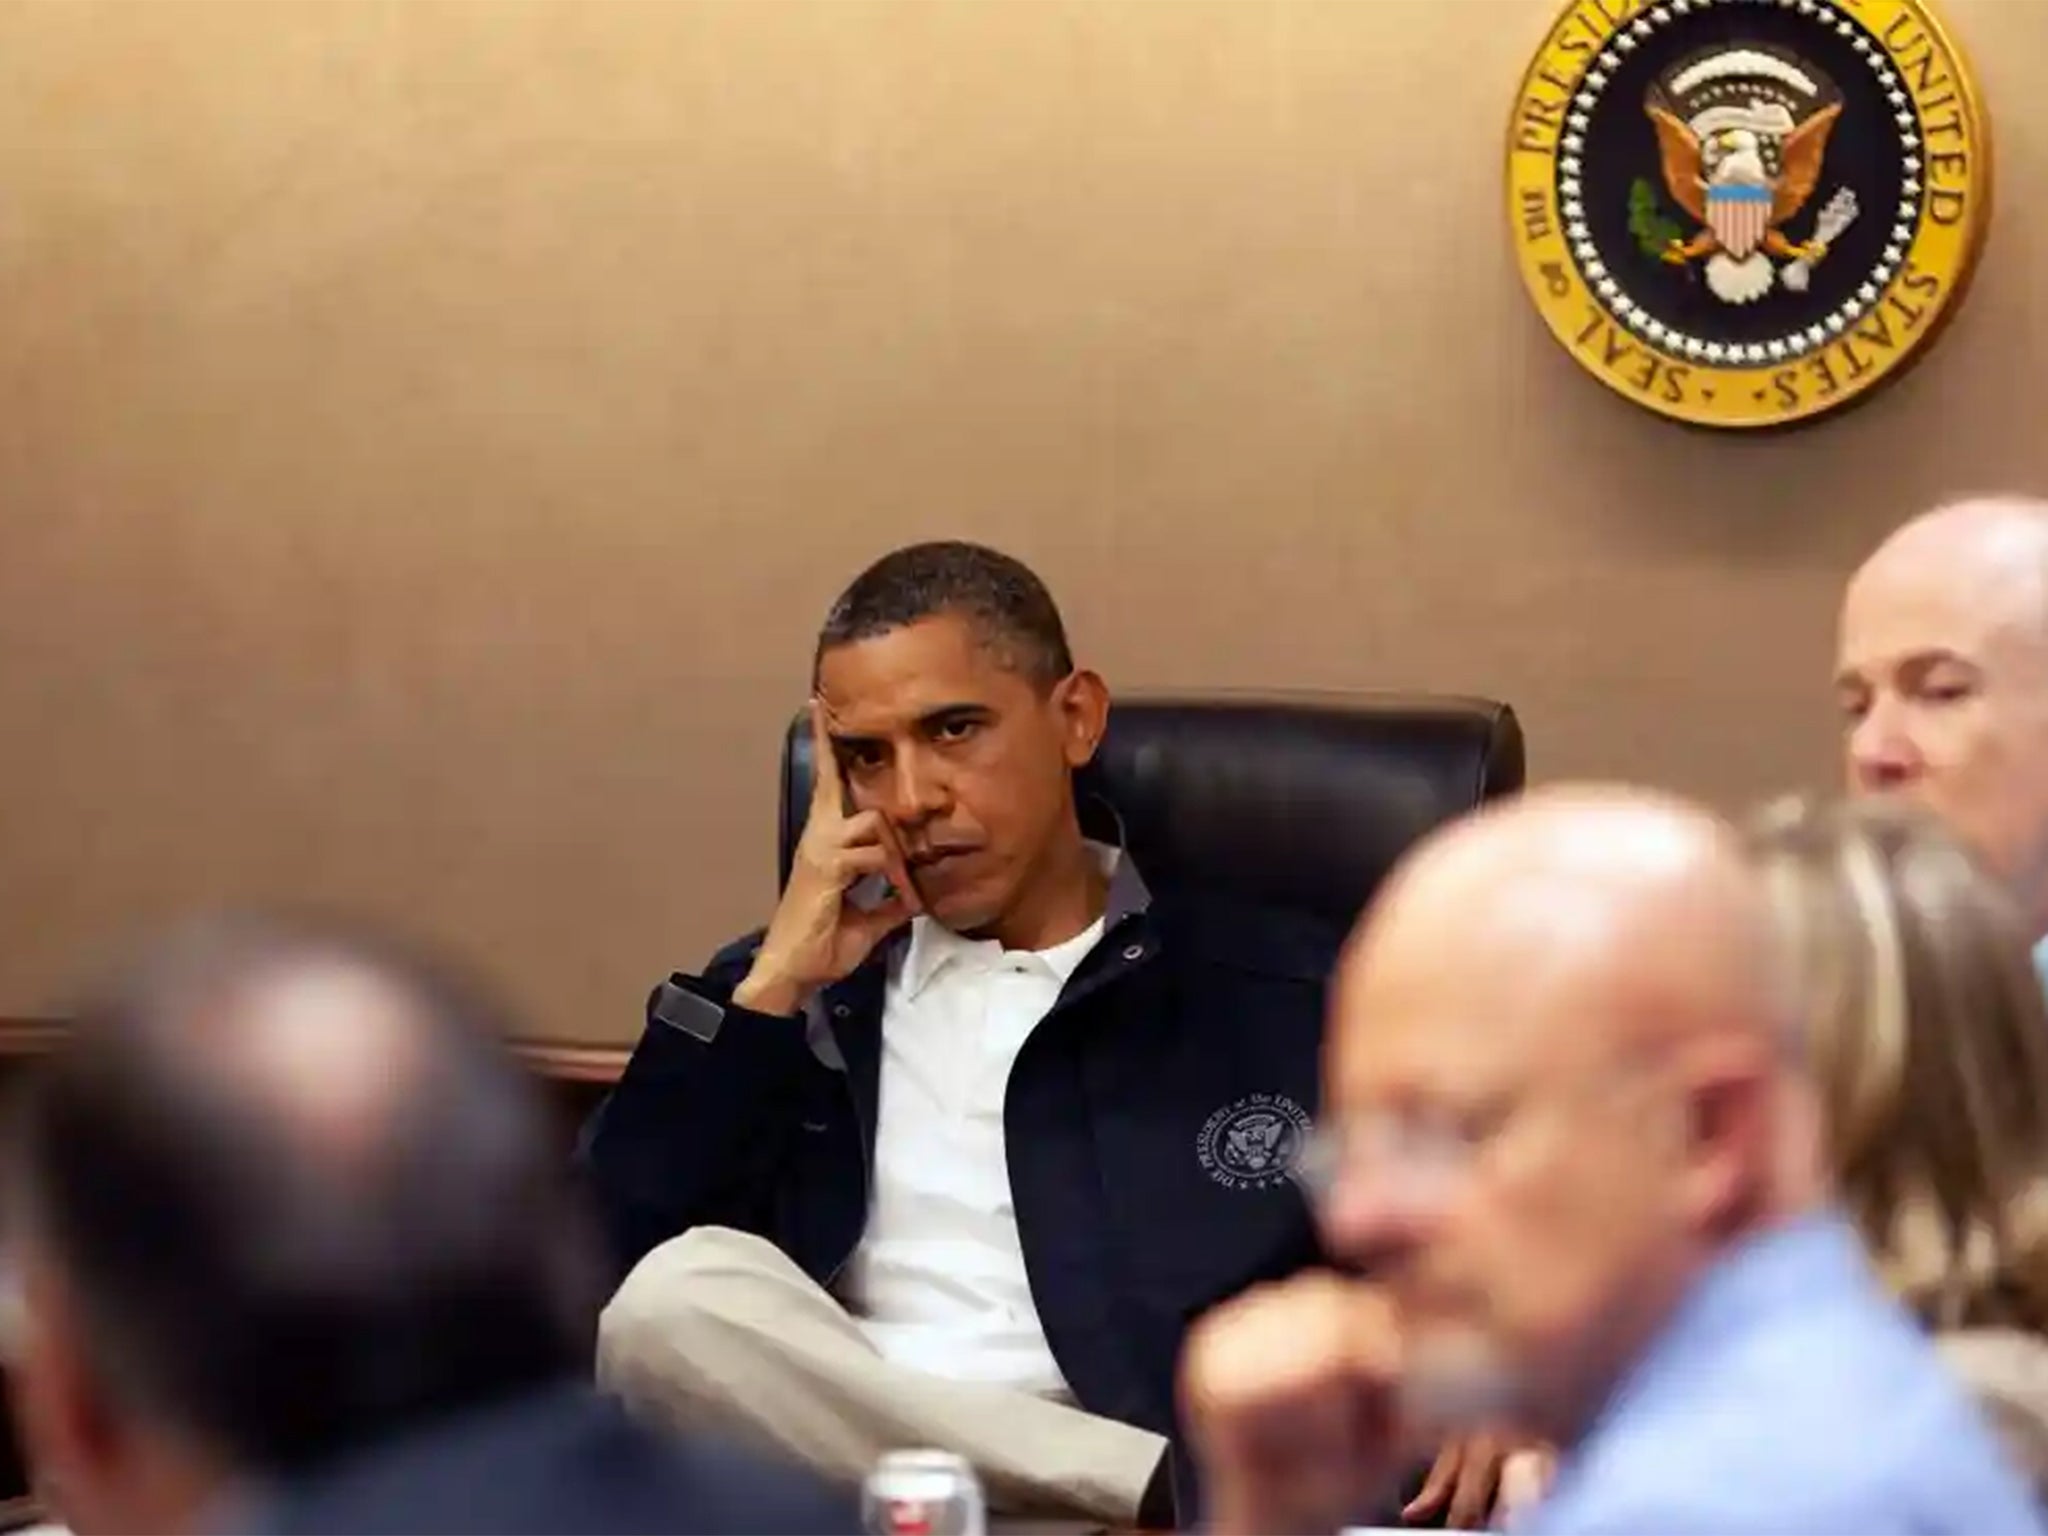 President Barack Obama in the White House Situation Room discussing the mission against Osama bin Laden on May 1, 2011